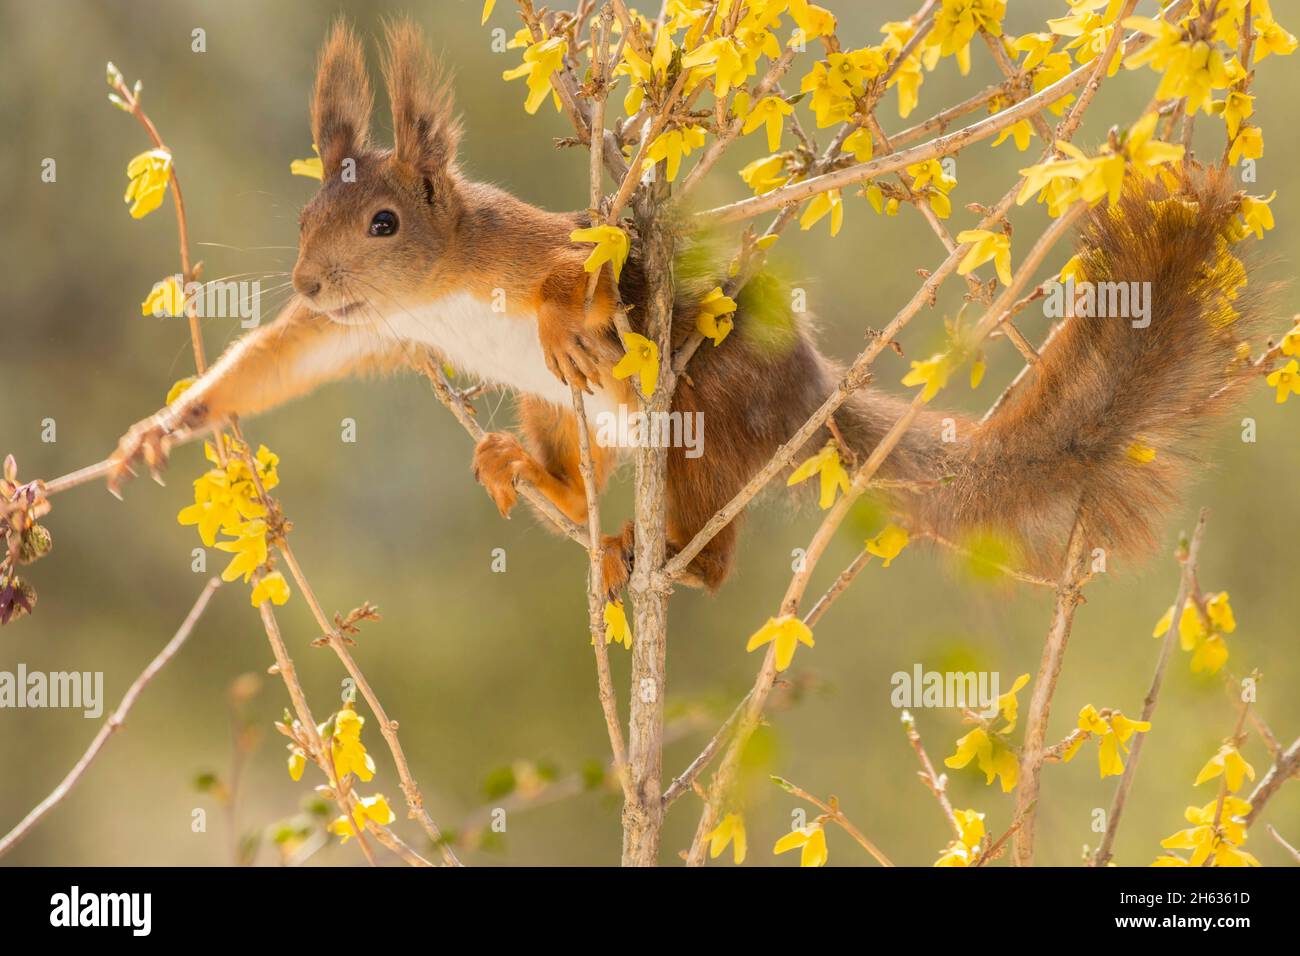 close up of red squirrel standing on branches with yellow flowers in sunlight Stock Photo